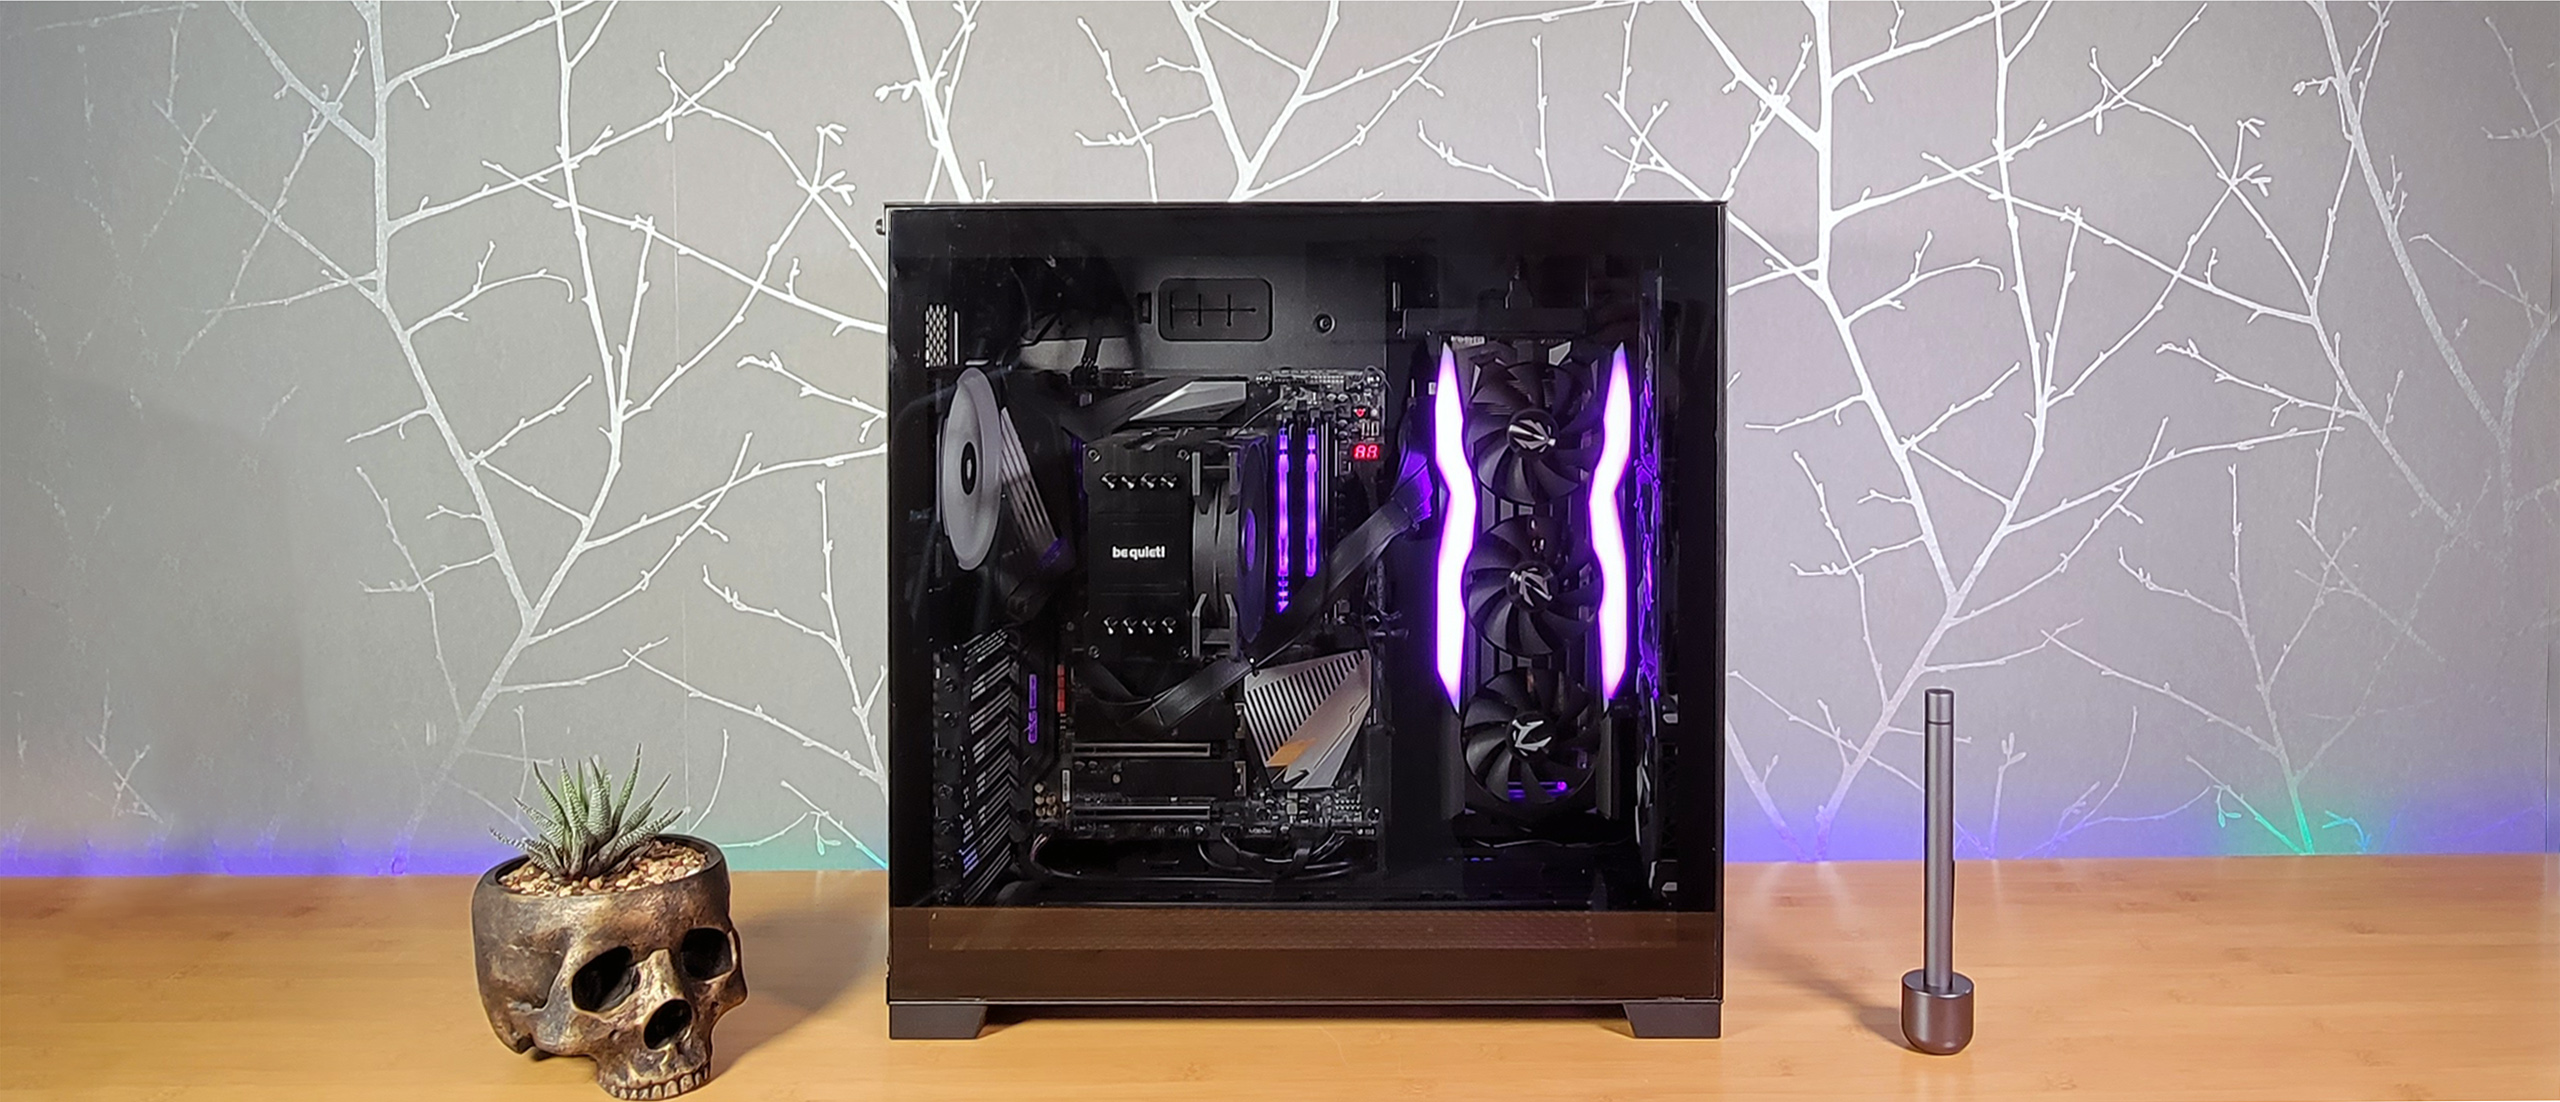 LIAN LI pushes new update to the O11 series PC chassis with new Dynamic EVO  variant